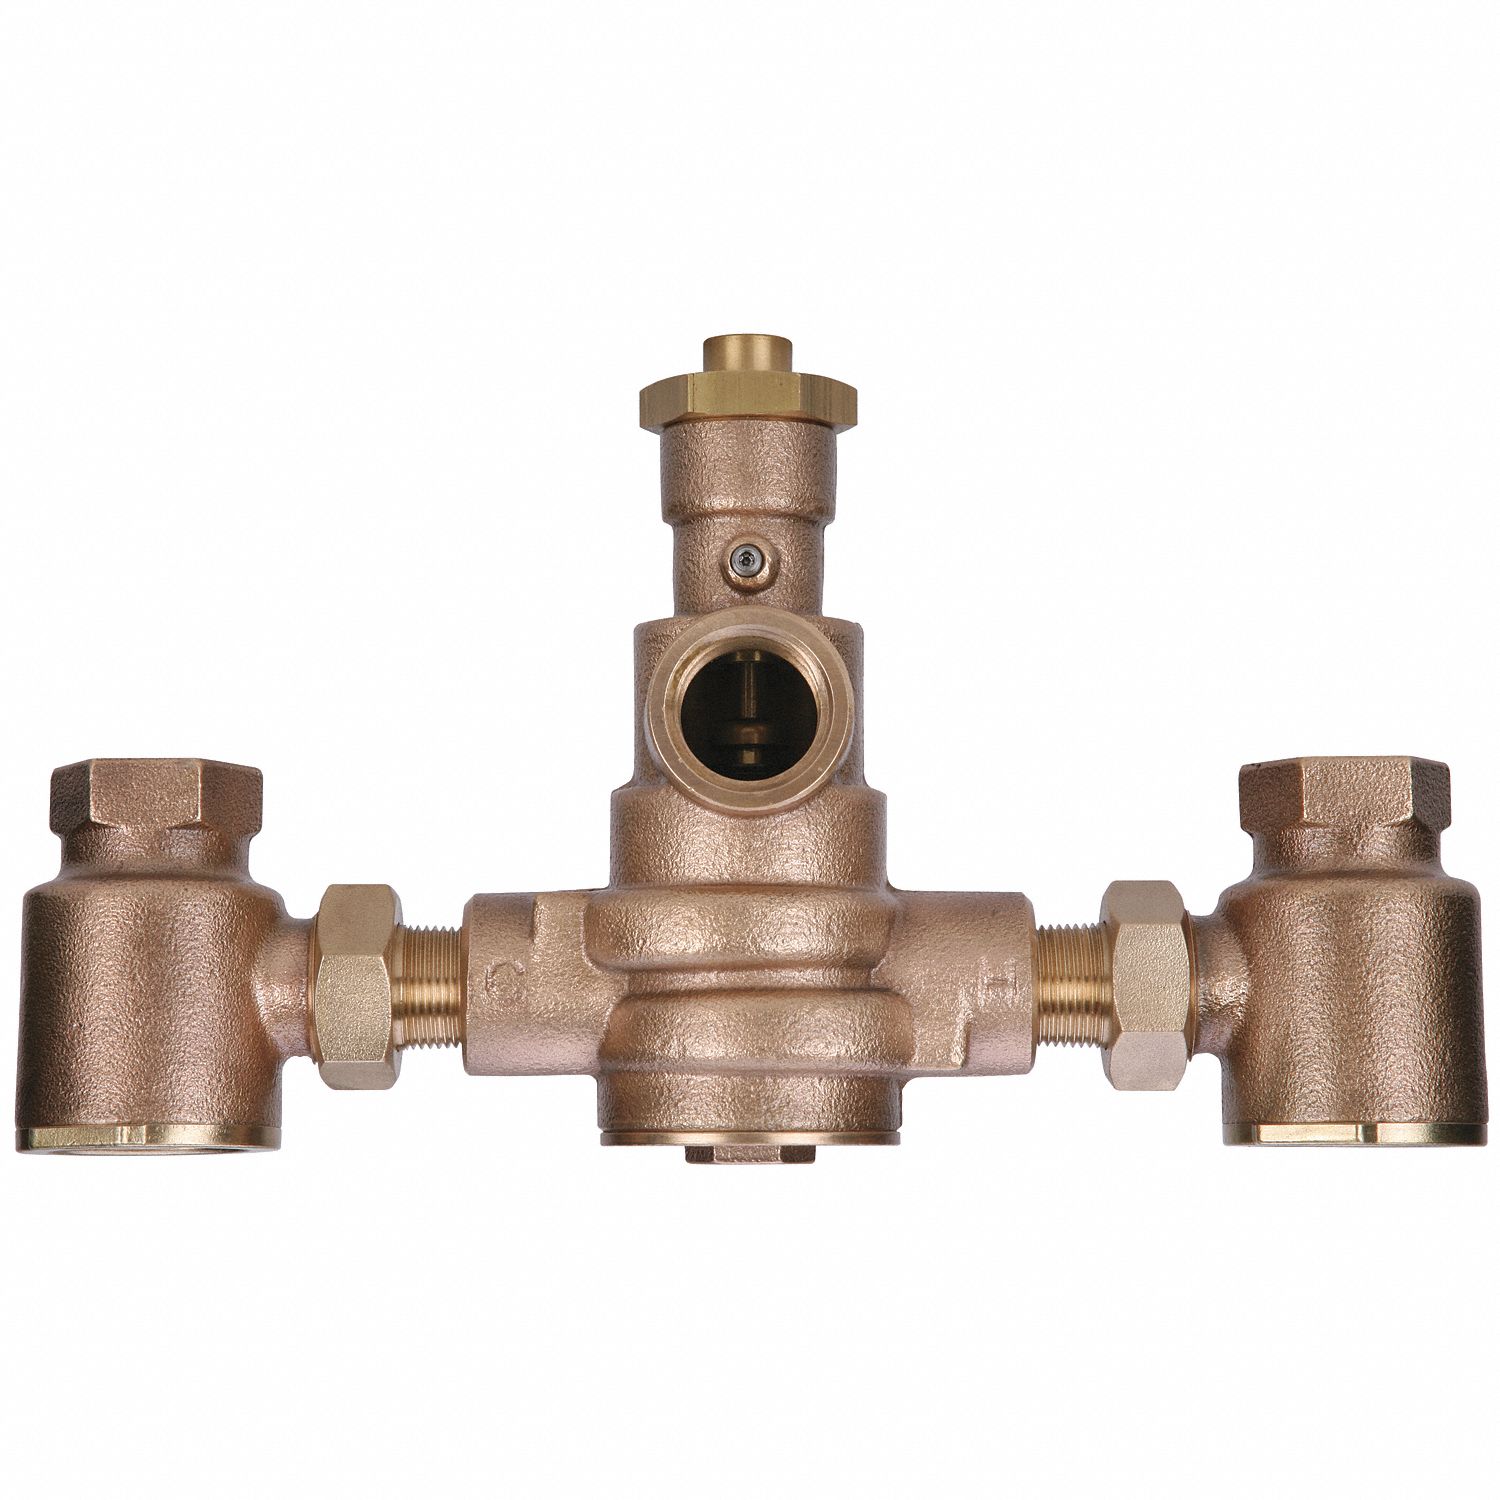 HYDRO MASTER Mechanical Water Mixing Valve, 3/8 Compression Fittings on  inlets and Outlet